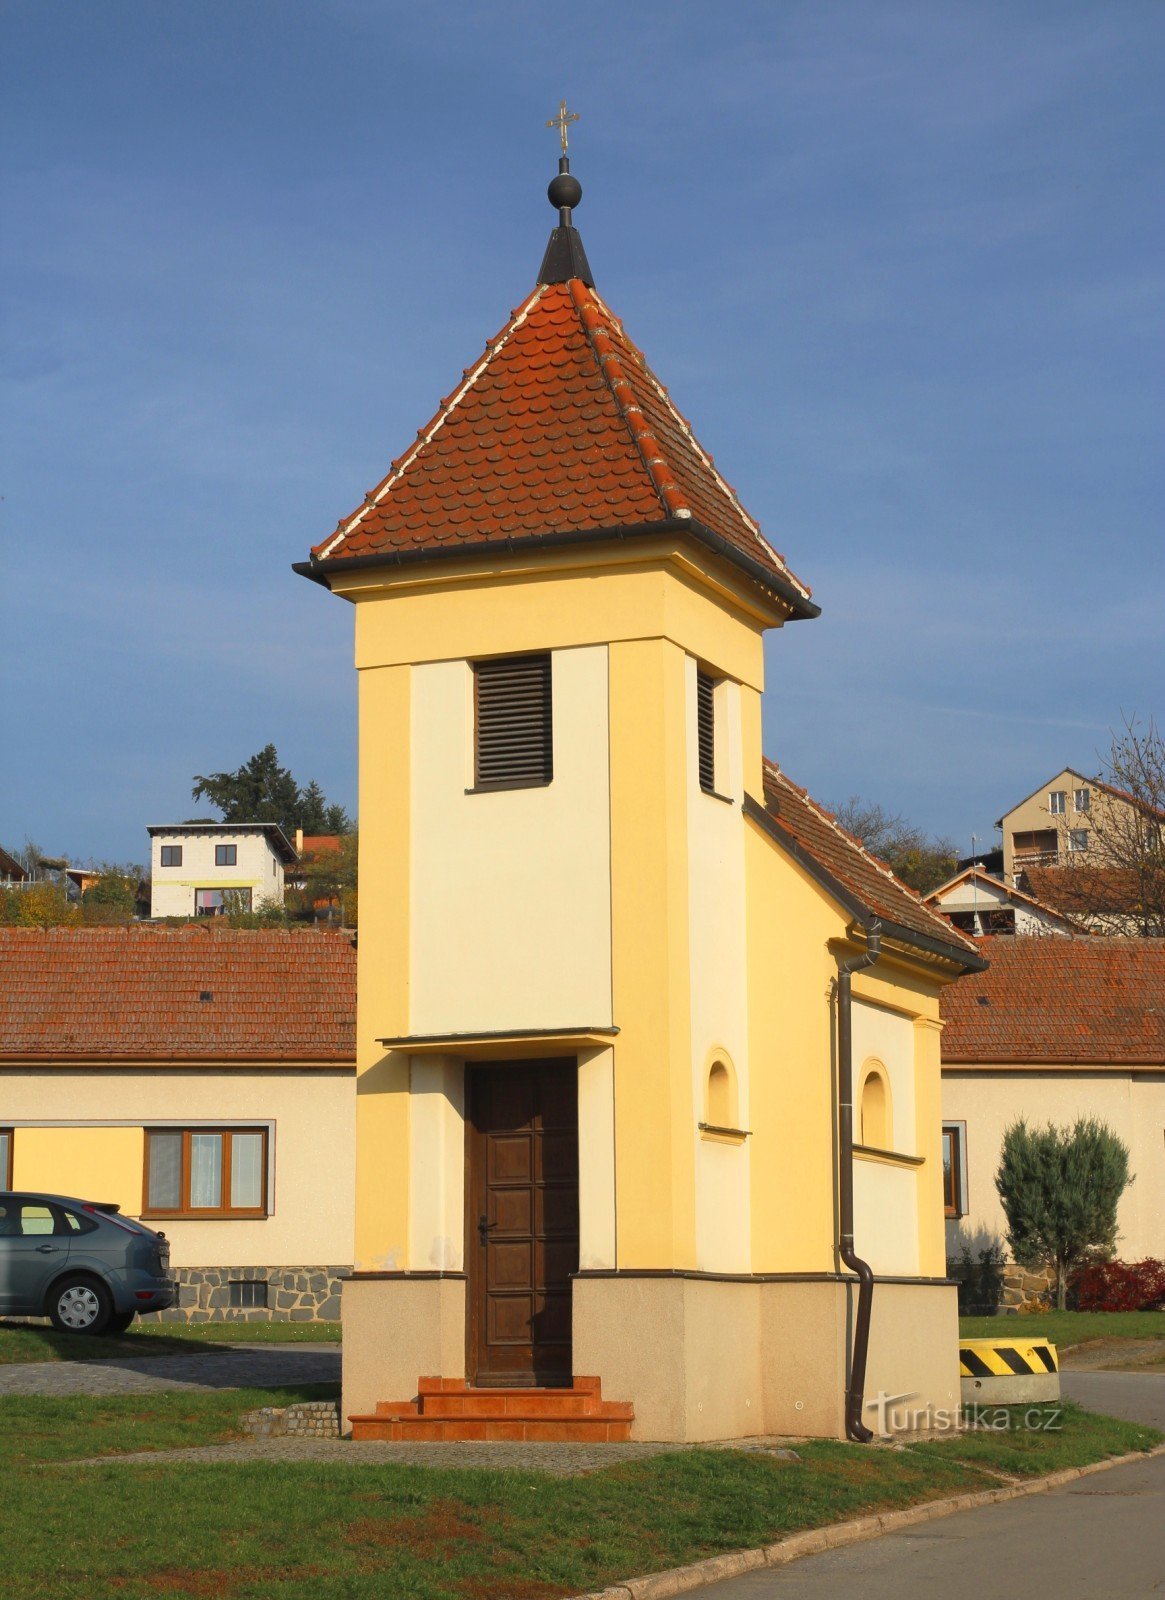 Chapel of St. Mary Magdalene in the village